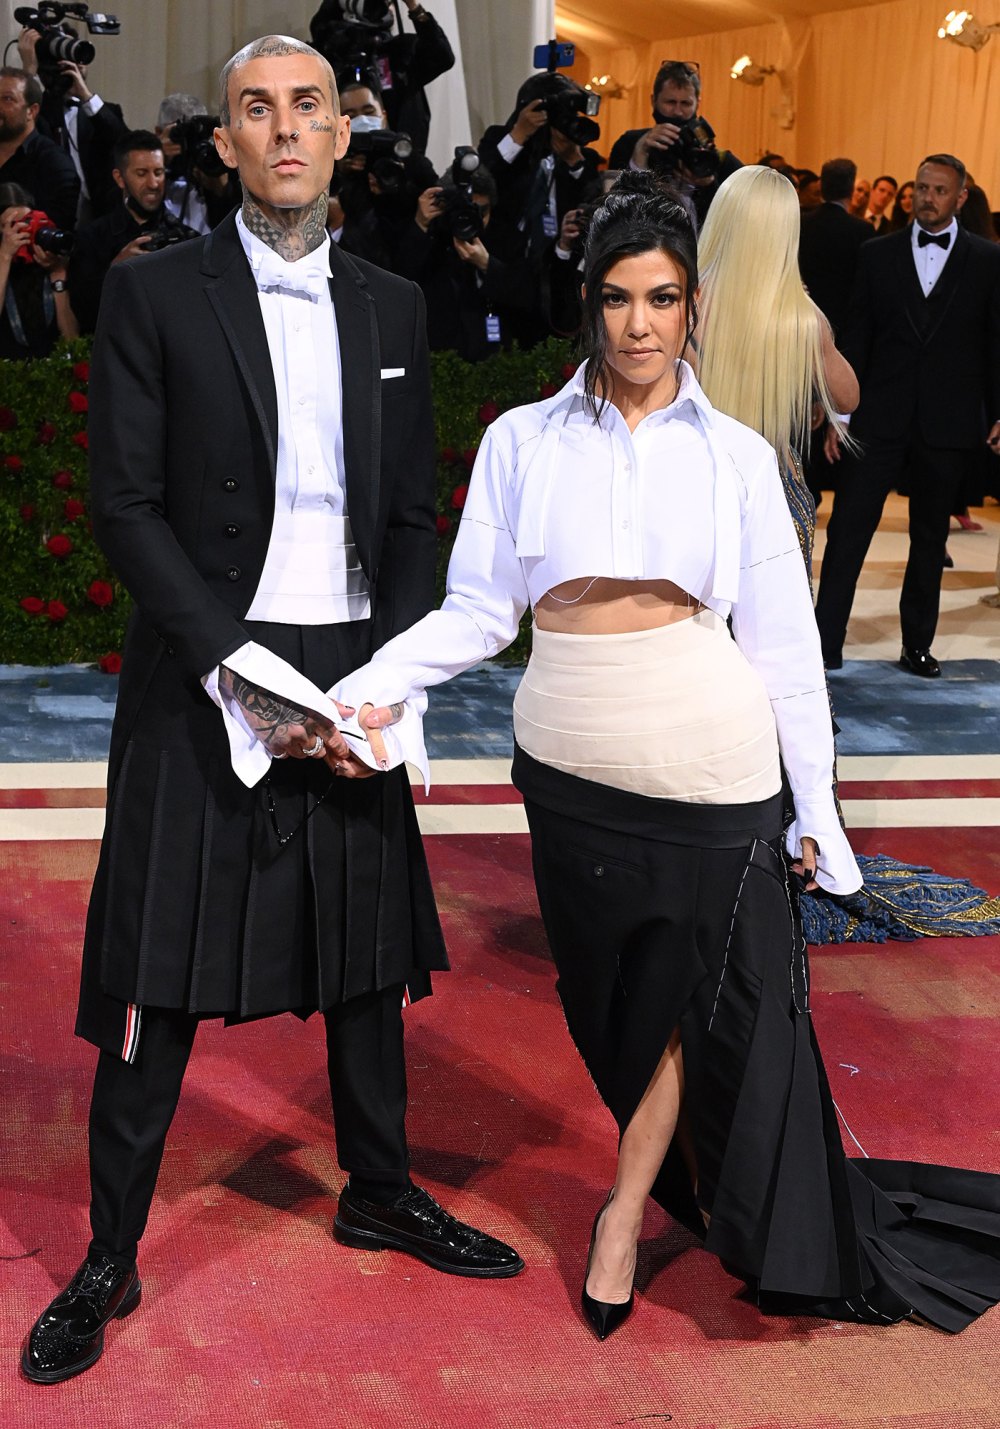 Travis Barker Details Living IVF Journey With Wife Kourtney Kardashian on Camera- ‘I Don’t Care if I’m C—ming In a Cup’ 569 Costume Institute Benefit celebrating the opening of In America: An Anthology of Fashion, Arrivals, The Metropolitan Museum of Art, New York, USA - 02 May 2022